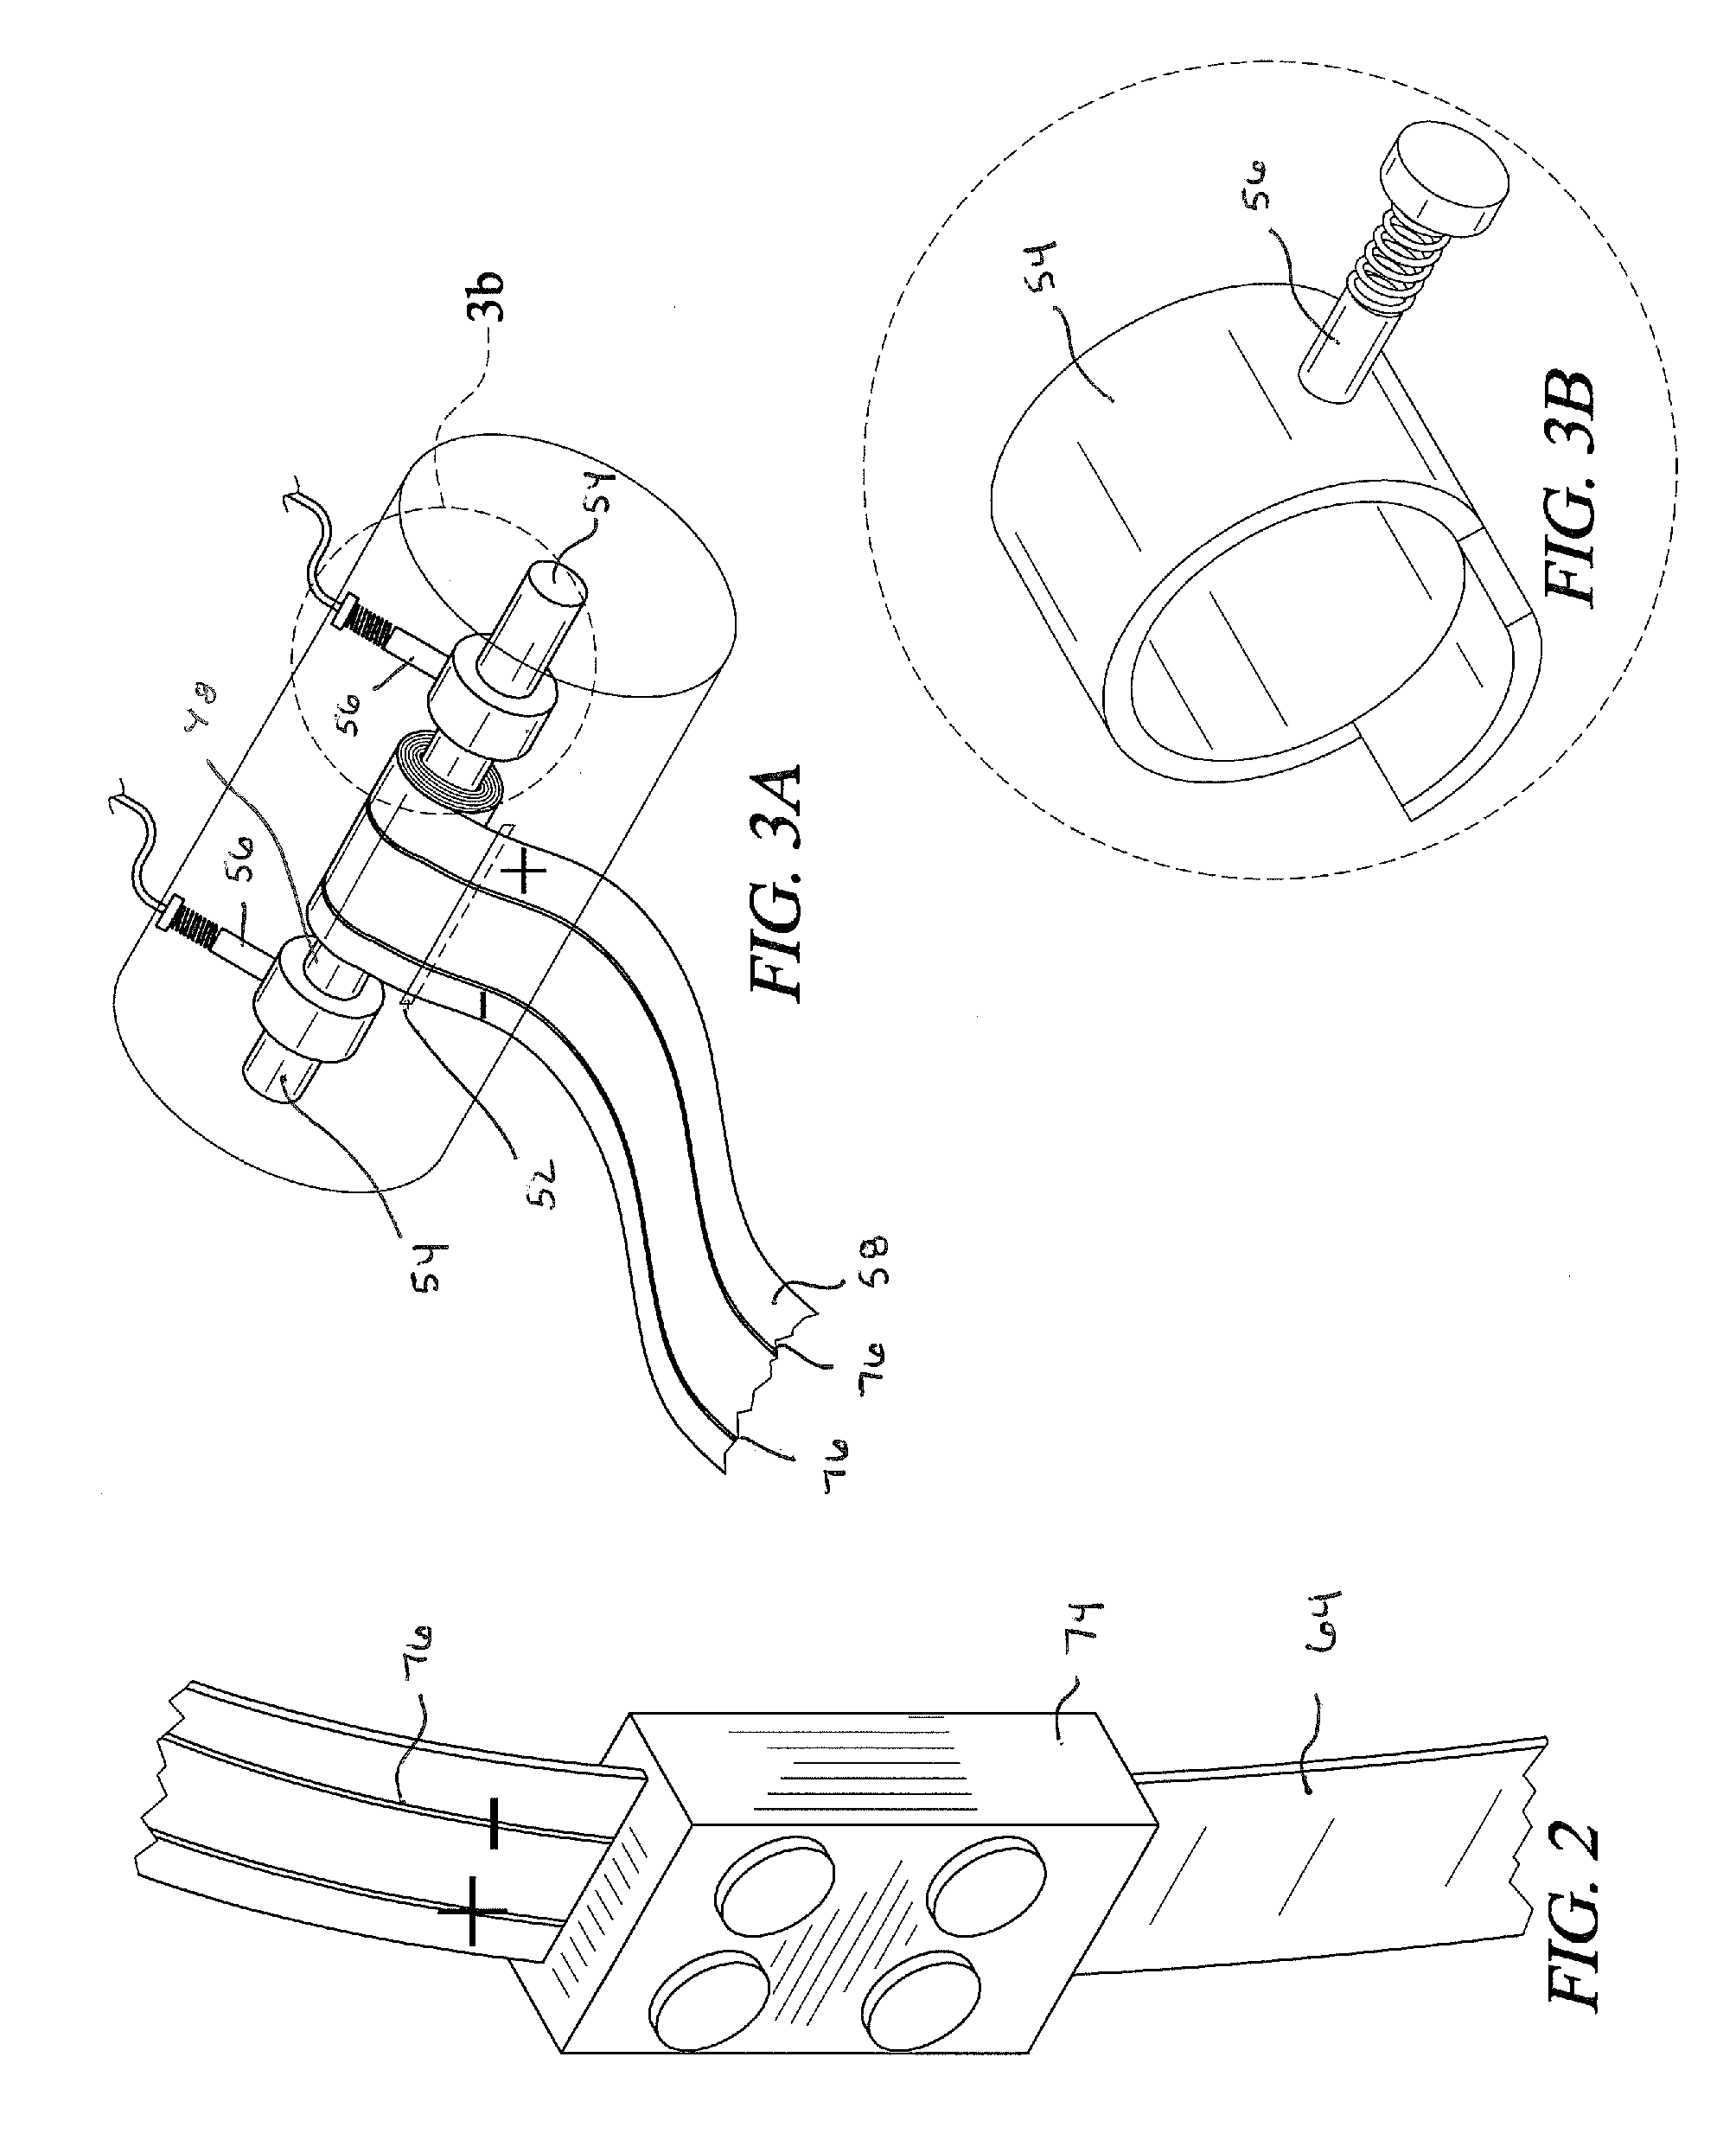 Aircrew Restraint System with Integrated Communications and Controls